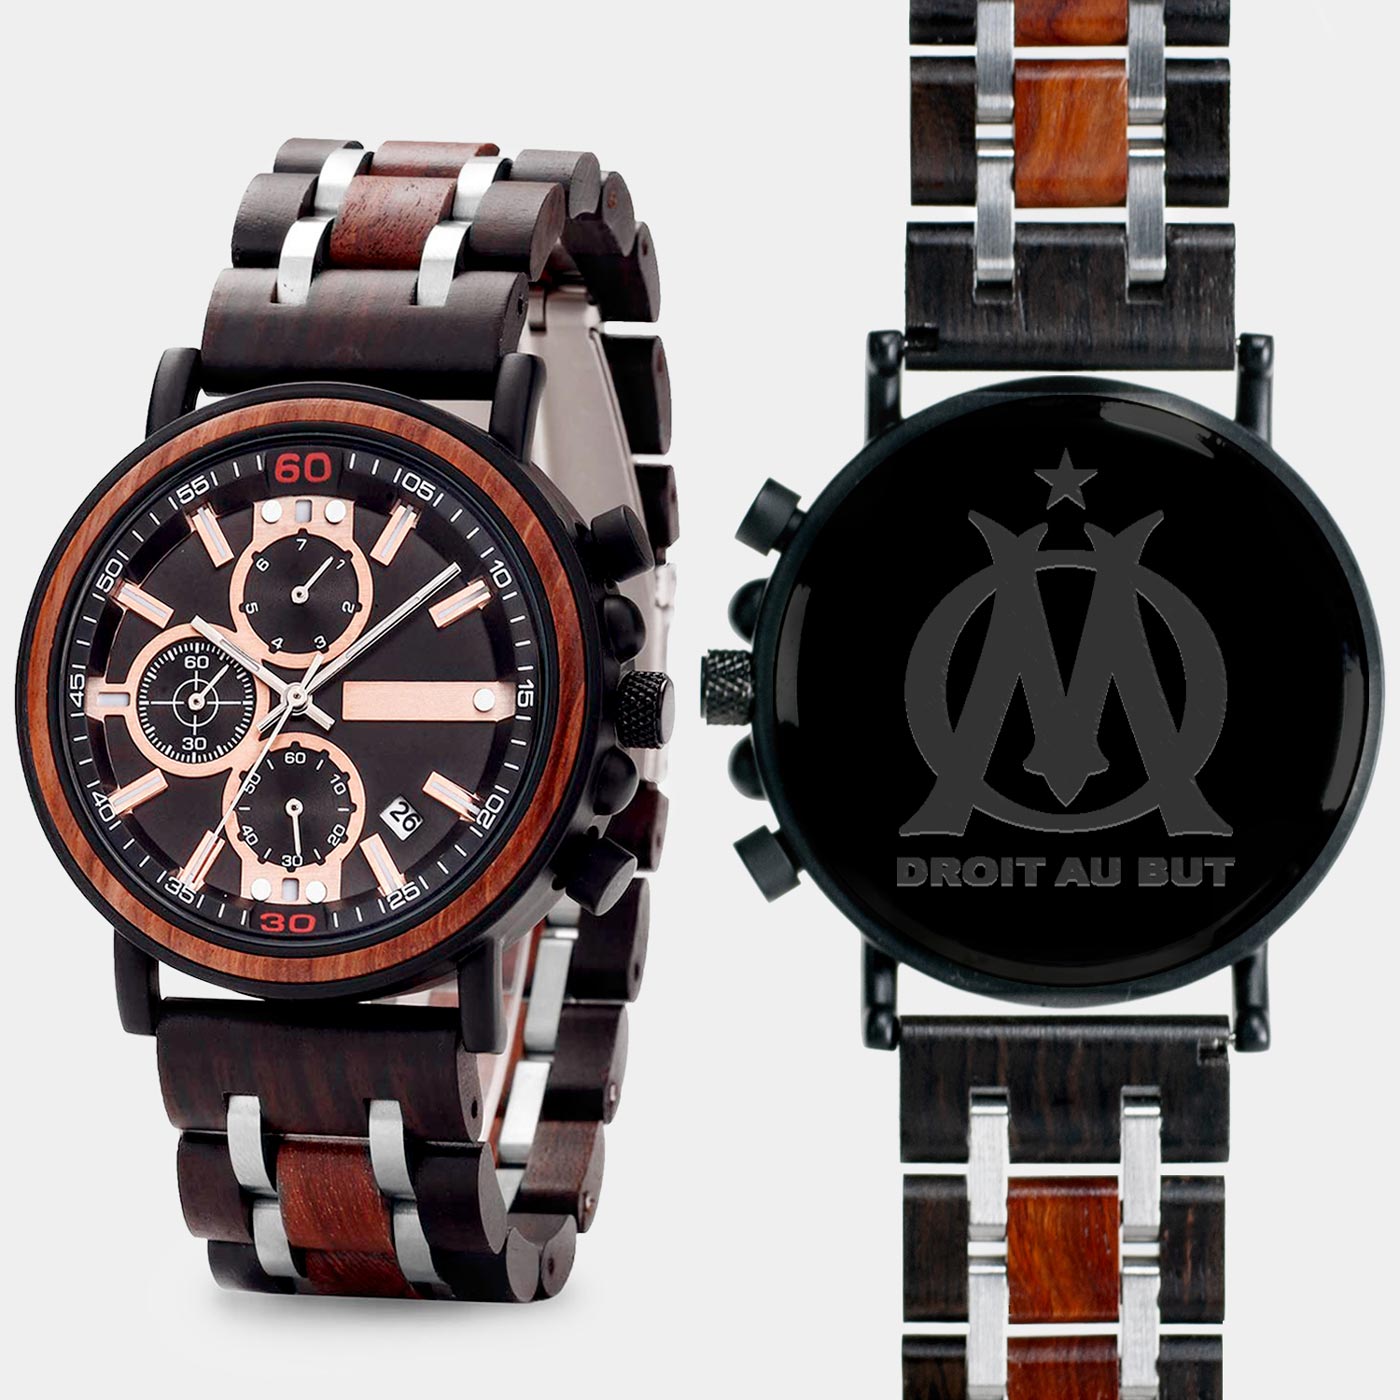 Olympique de Marseille Mens Wrist Watch  - Personalized Olympique de Marseille Mens Watches - Custom Gifts For Him, Birthday Gifts, Gift For Dad - Best 2022 Olympique de Marseille Christmas Gifts - Black 45mm FC Wood Watch